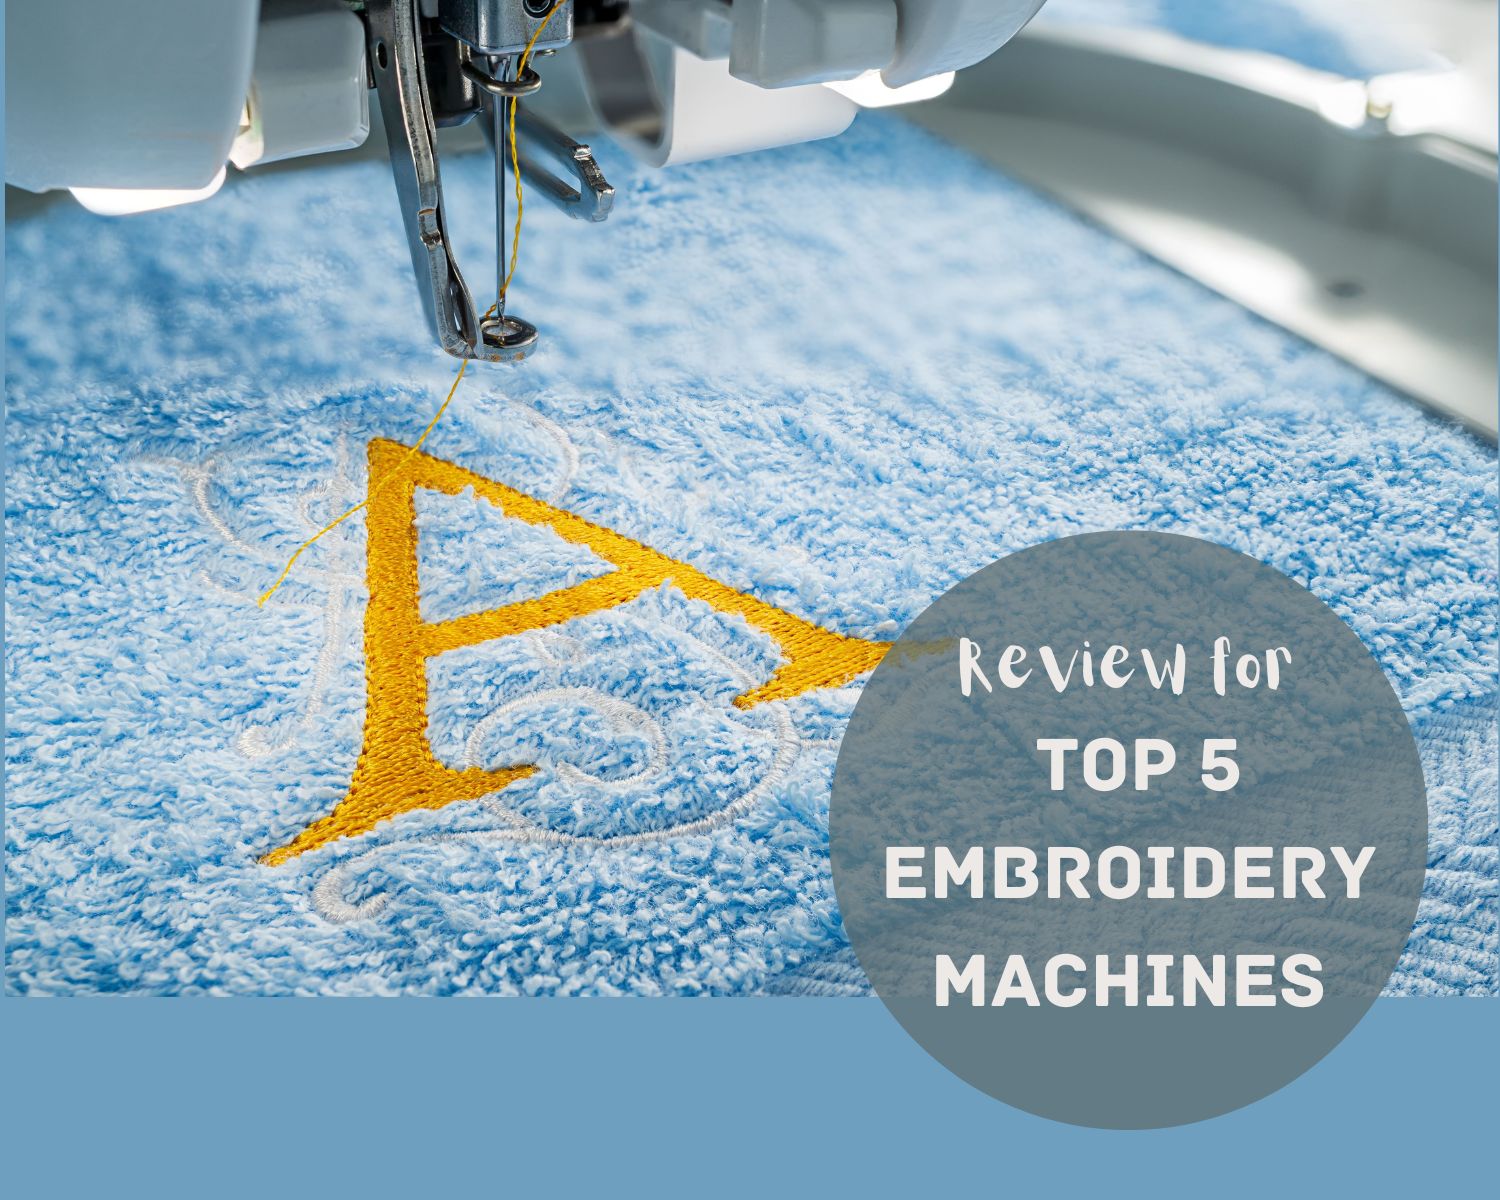 https://www.lovetosewstudio.com/wp-content/uploads/2023/01/Top-5-Embroidery-Machines-REVIEW.jpg